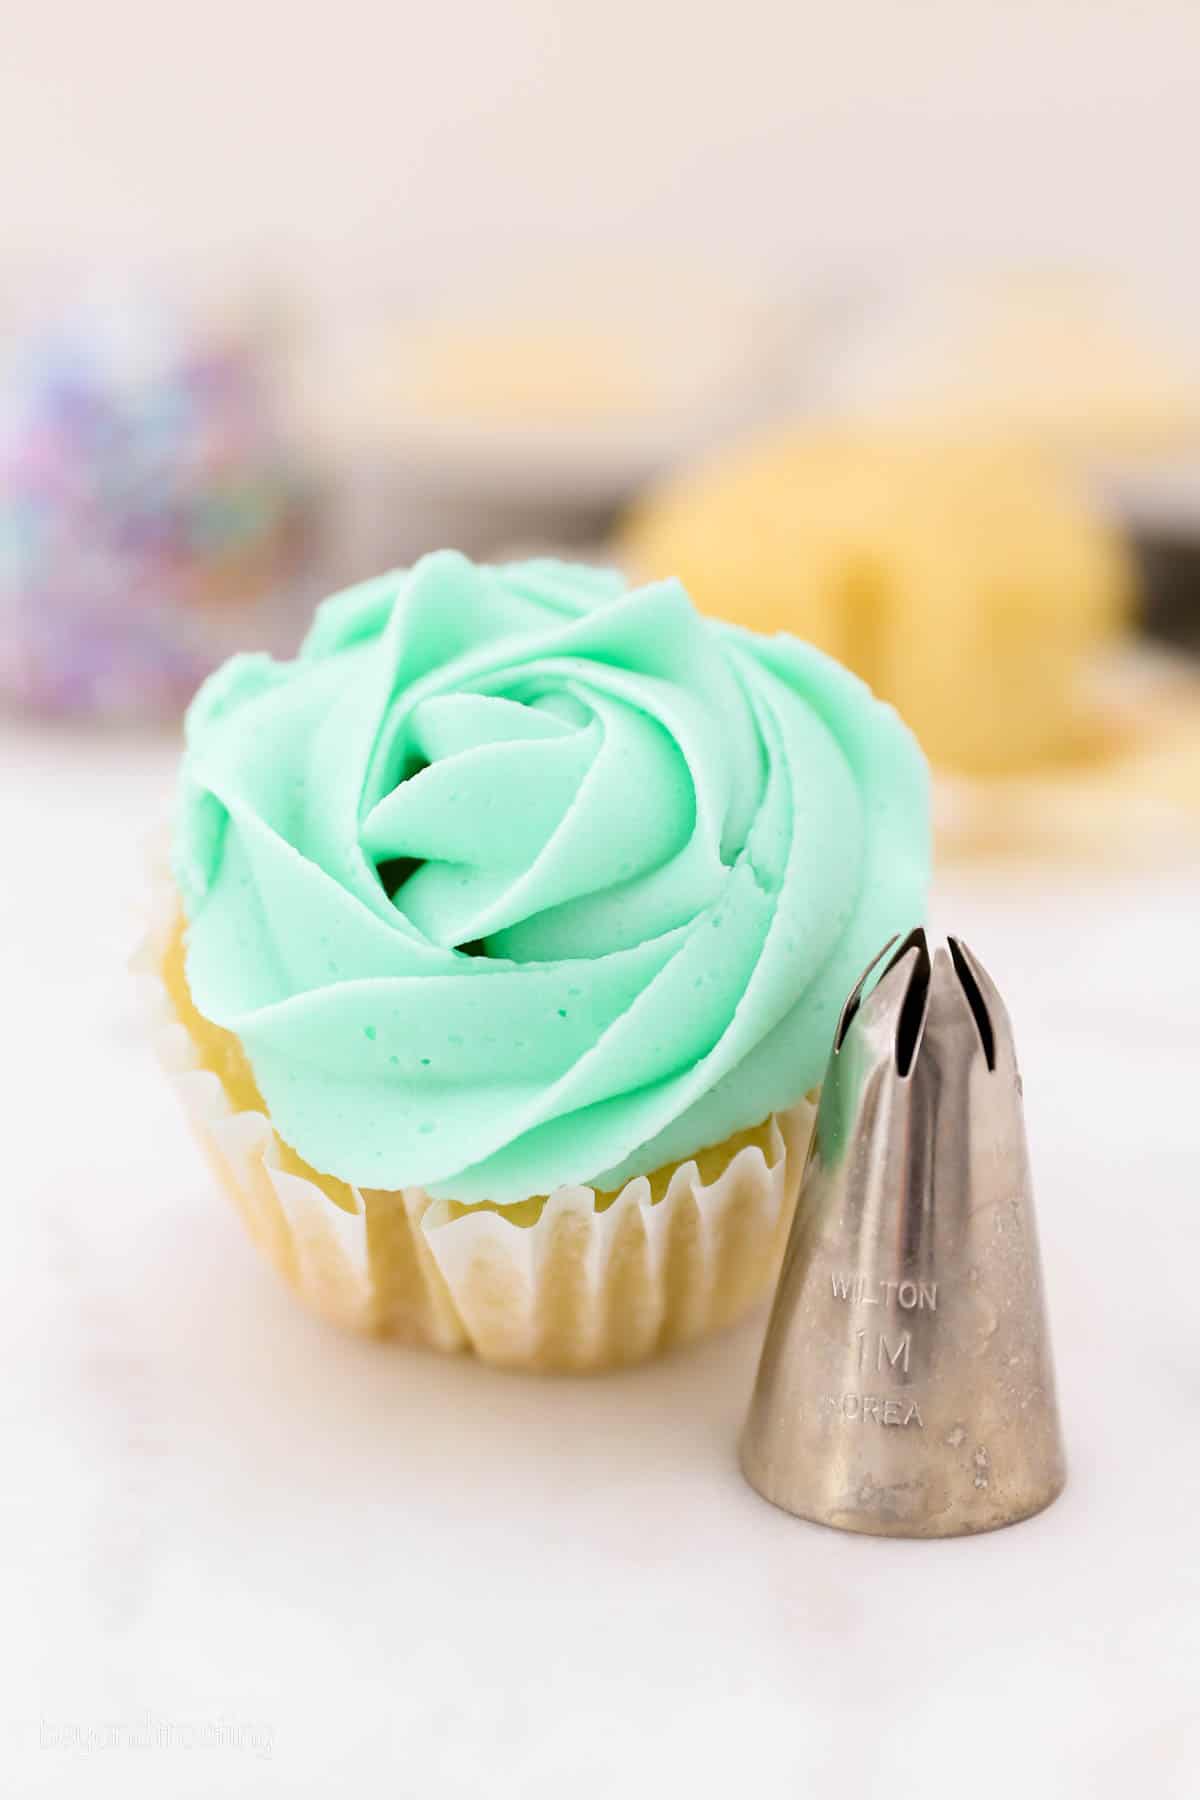 A 1M piping tip next to a frosted cupcake piped with a 1M swirl to look like a rose